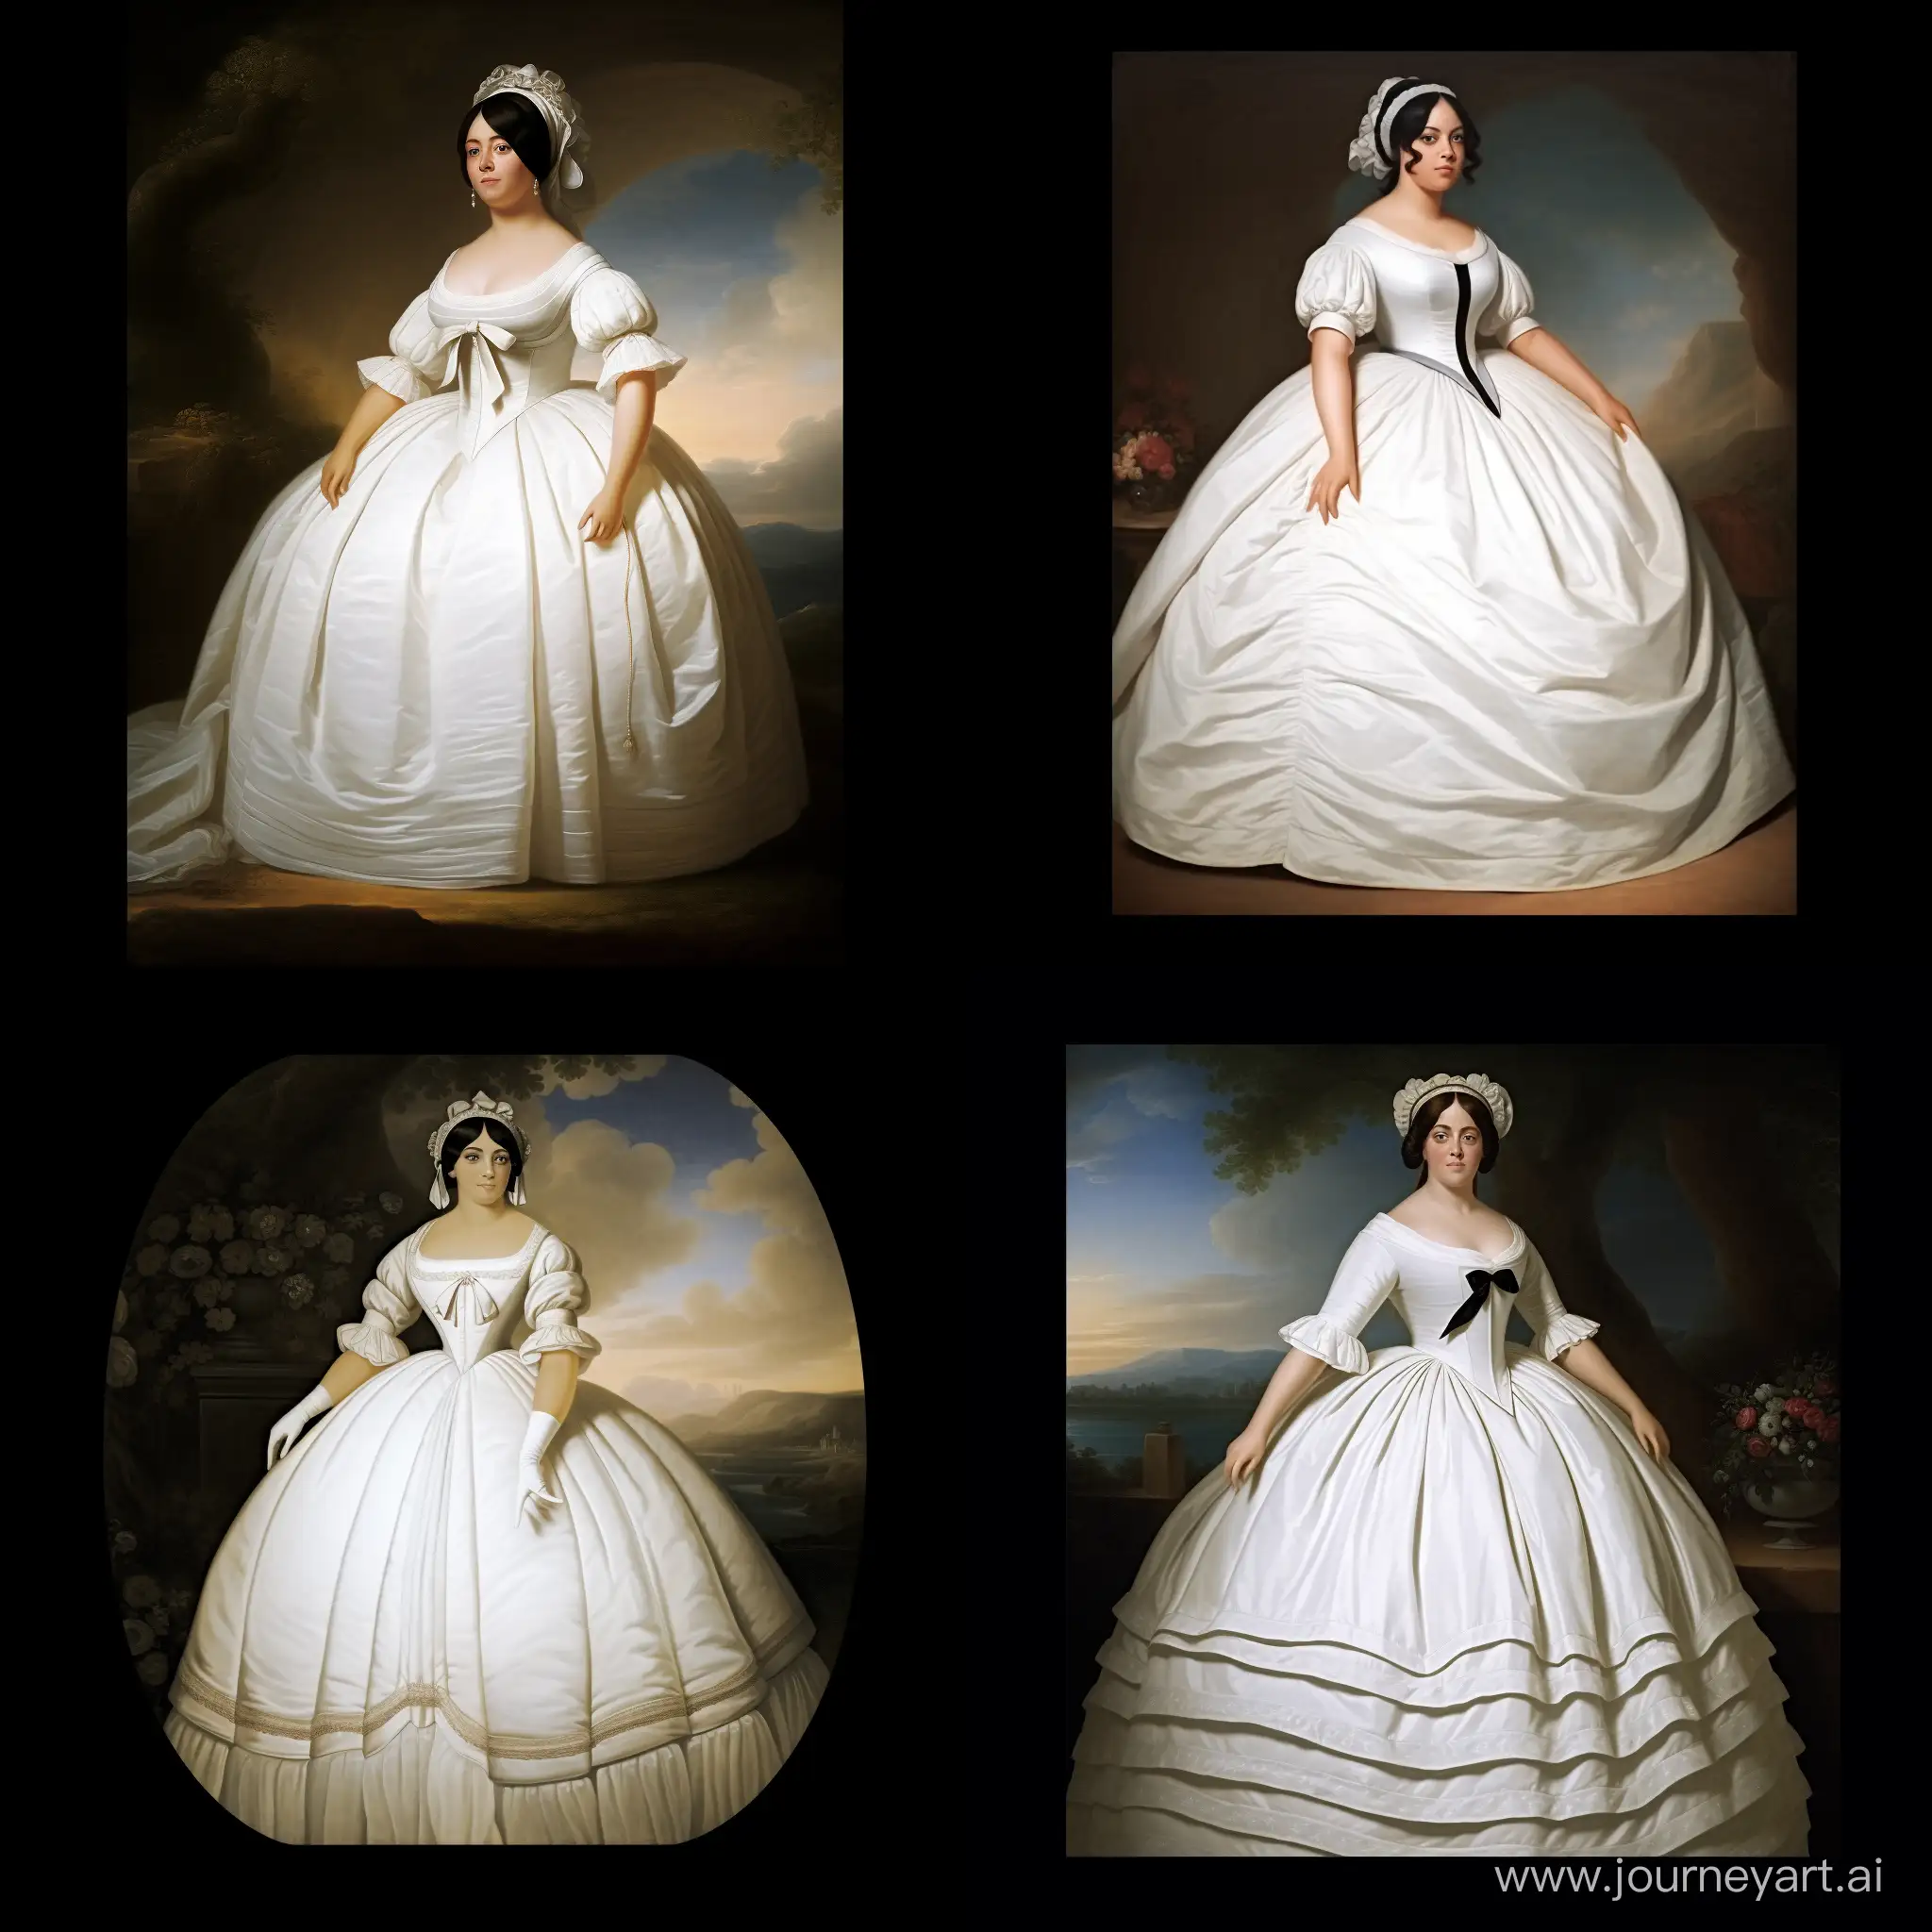 19th century British bride curvy tally woman in white bride cotton dress and white stockings